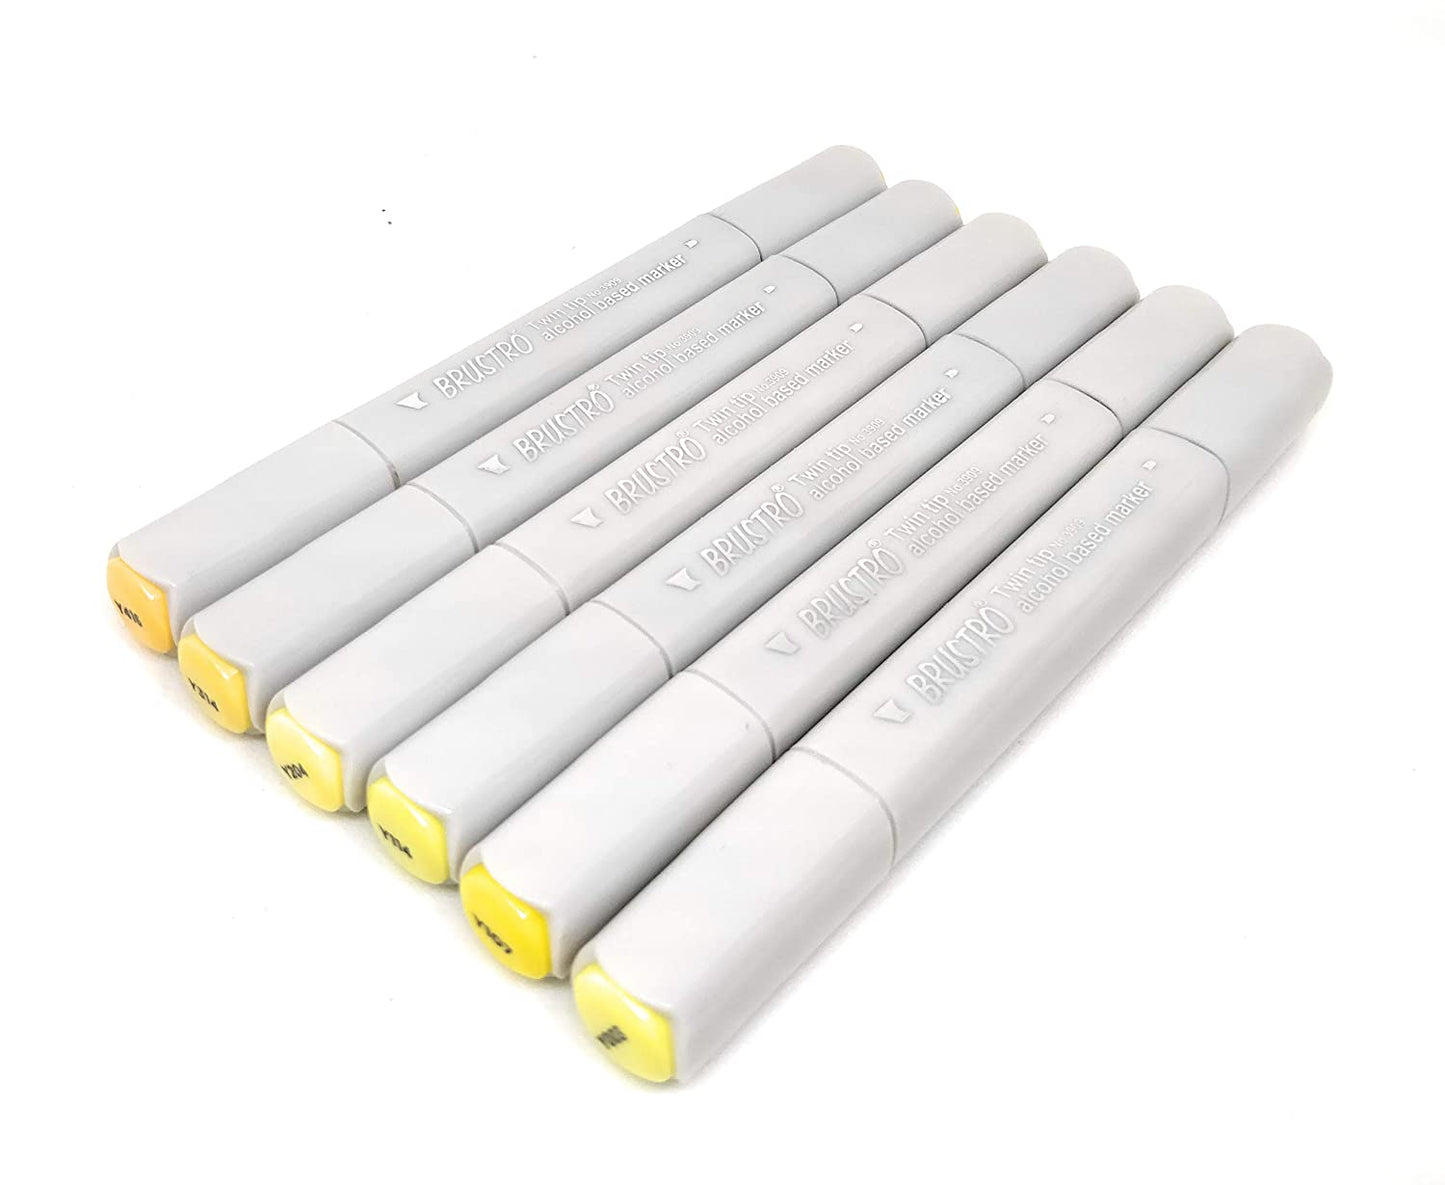 BRUSTRO Twin Tip Alcohol Based Marker Set of 6 (Yellows)